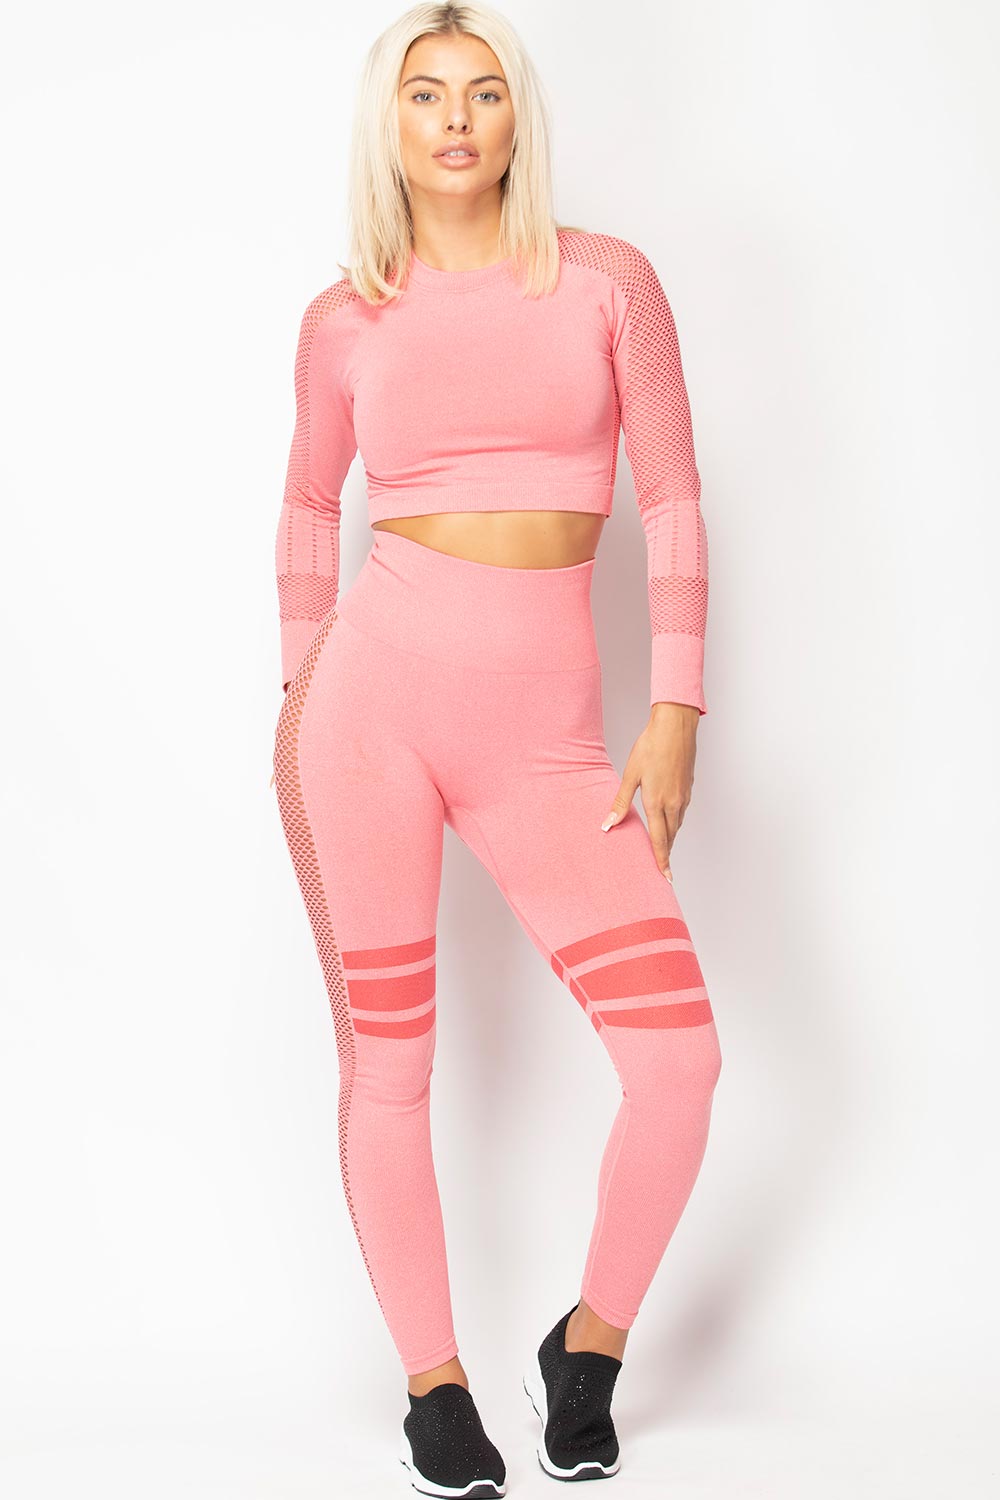 pink high waisted fittness leggings and top set 